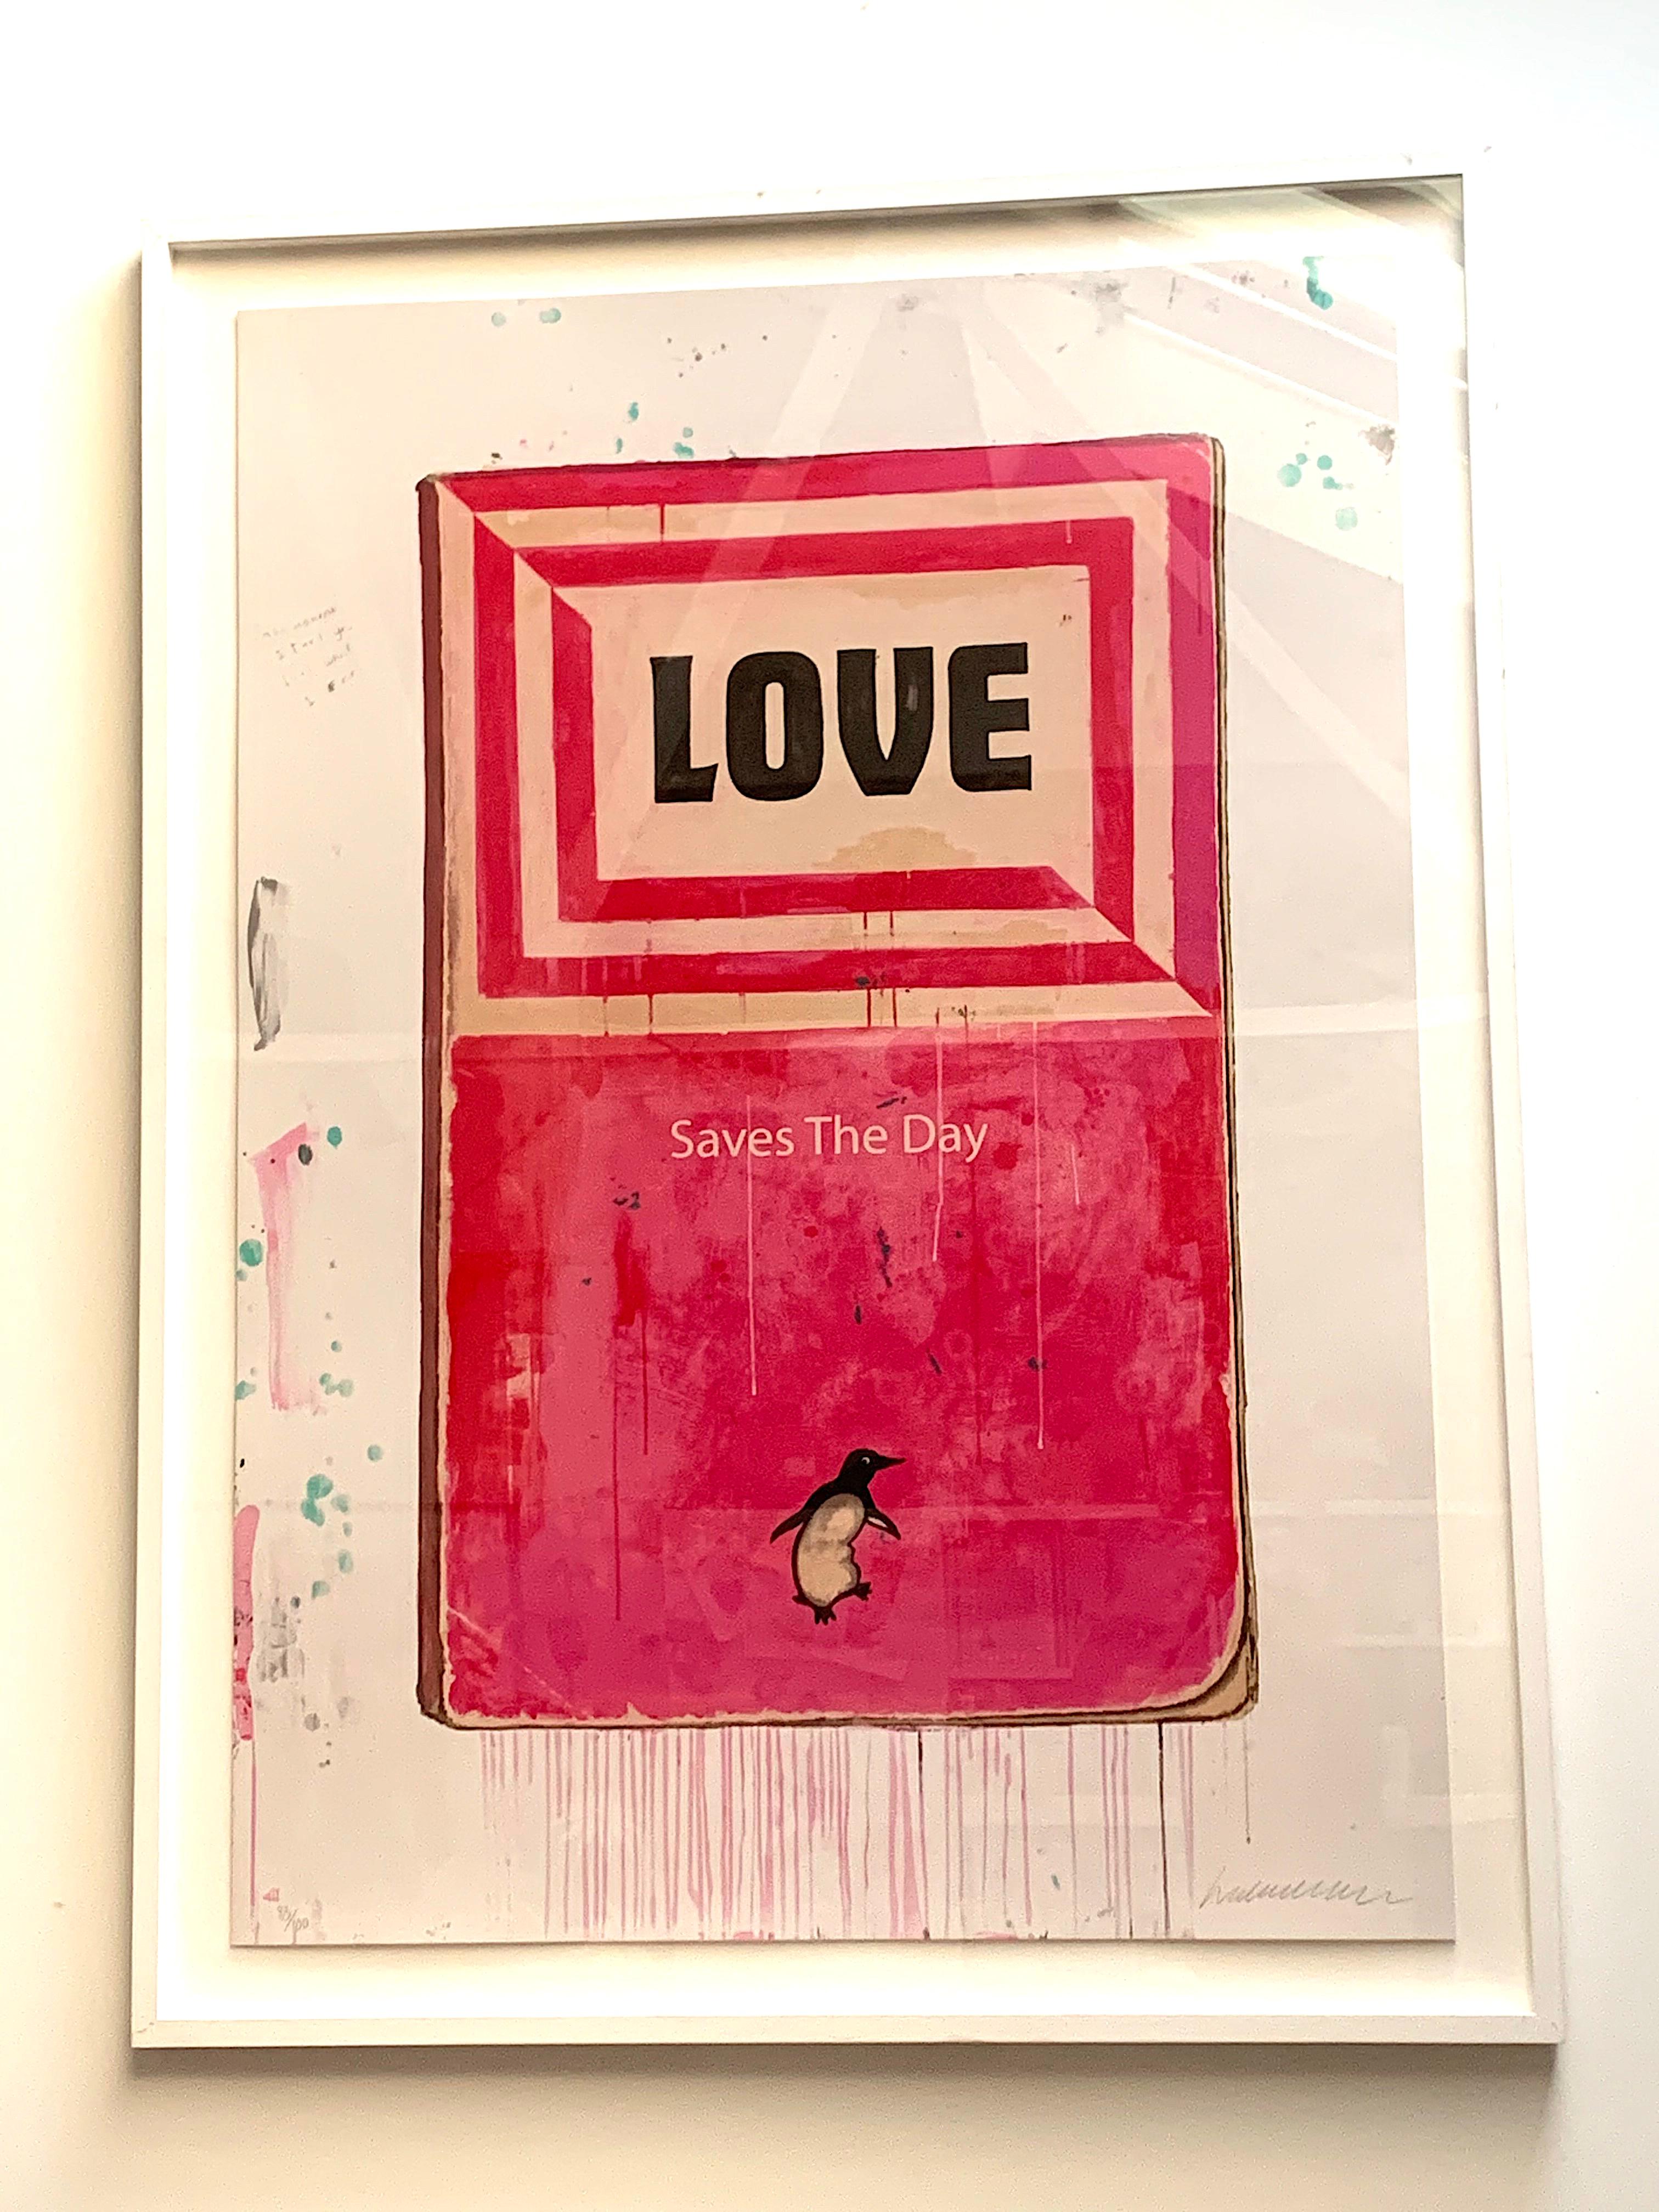 „Love Saves The Day“ Harland Miller, „Love Saves The Day“, 15farbiger Siebdruck im Angebot 1